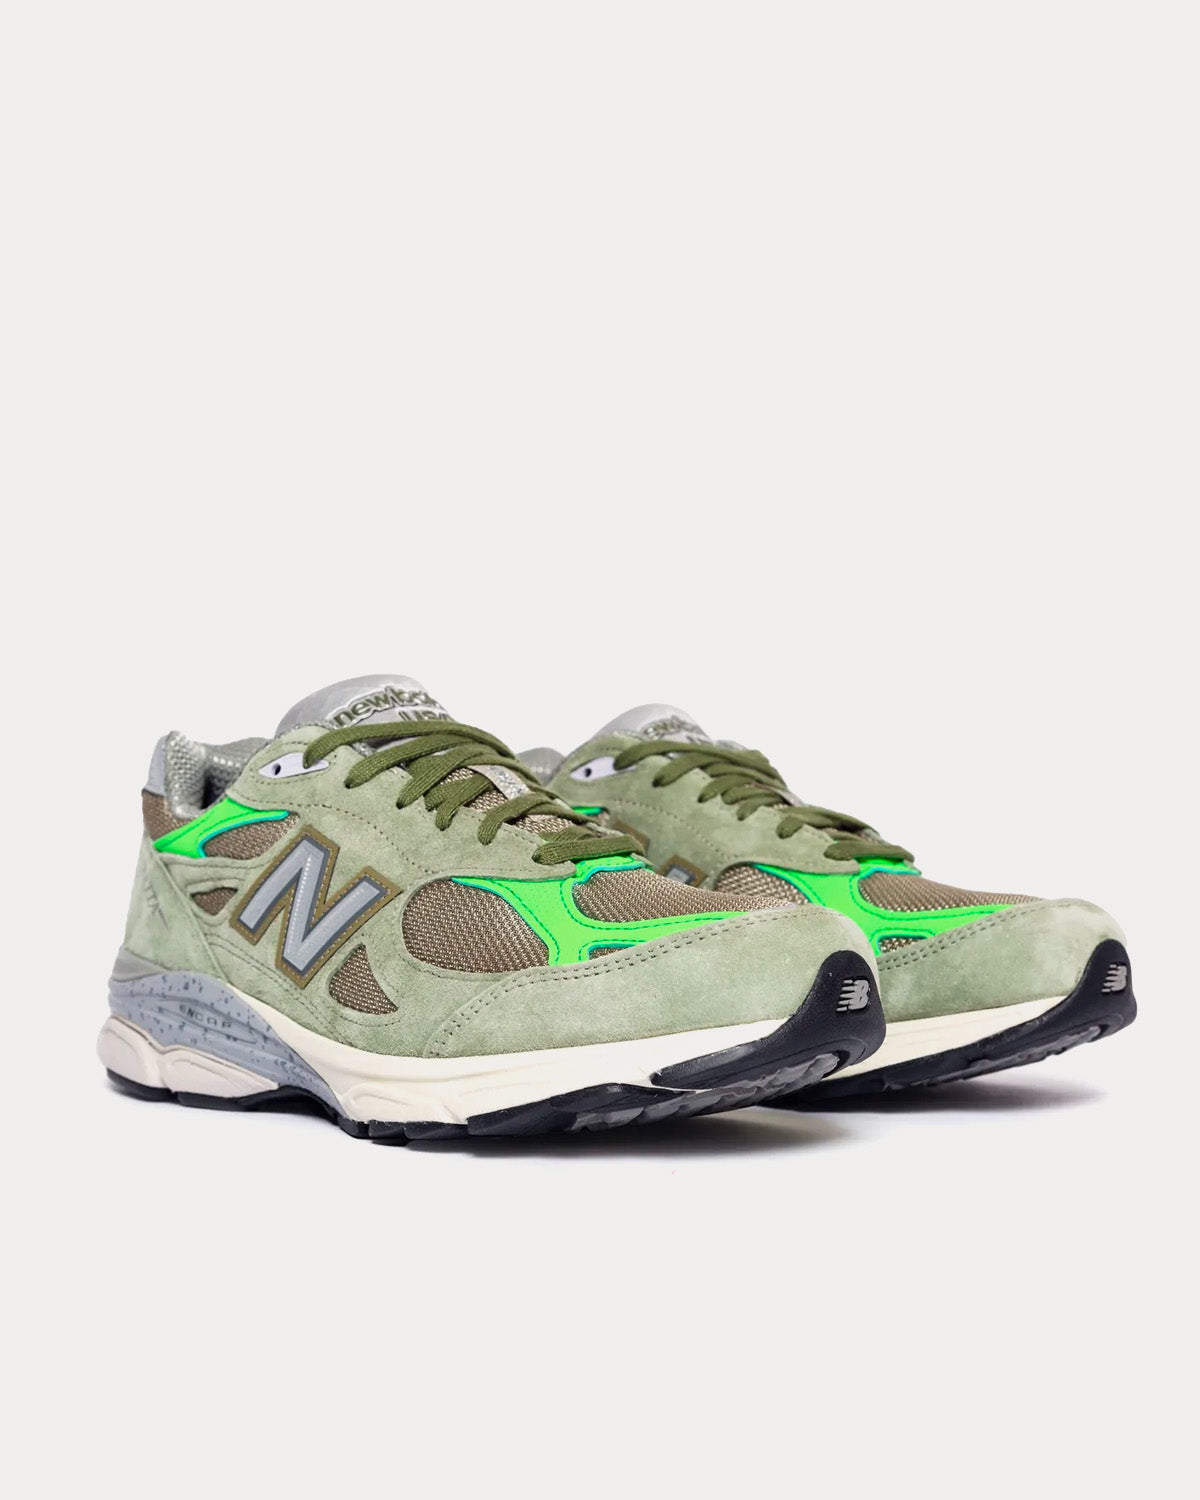 New Balance x Patta - 990v3 Olive Low Top Sneakers